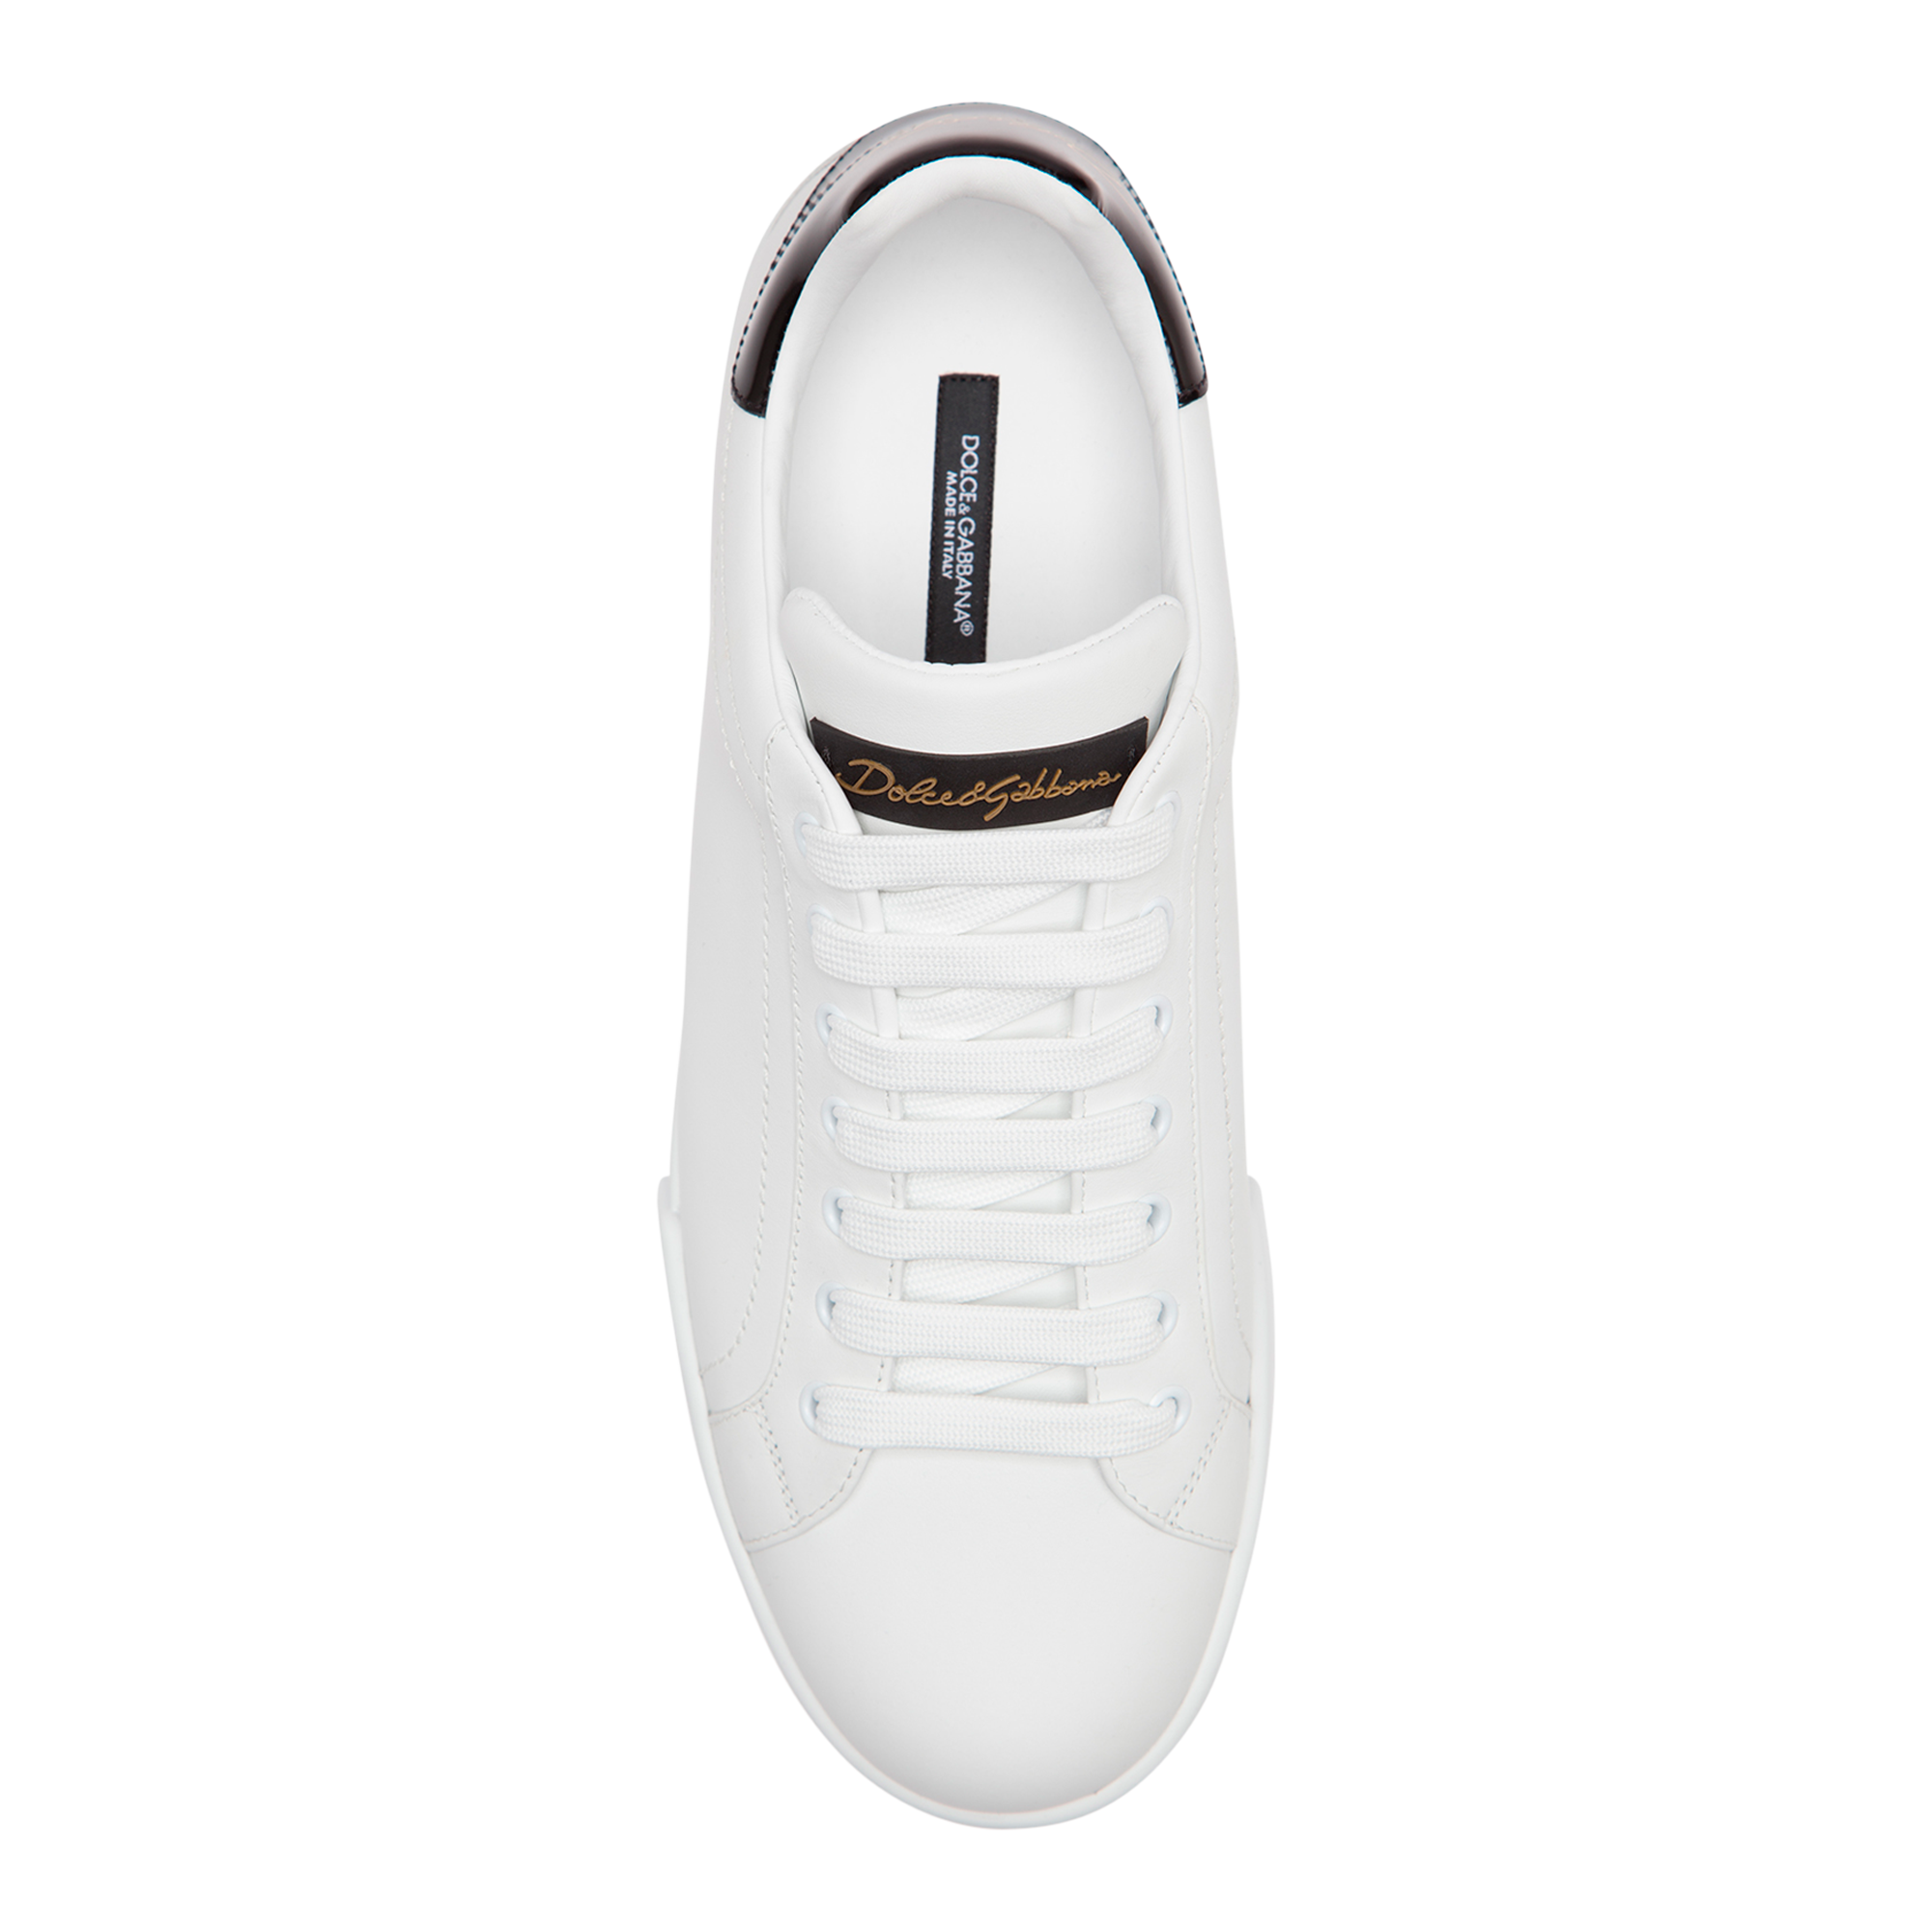 Dolce & Gabbana LEATHER SNEAKERS WITH SLOGAN PATCH AND APPLICATIONS White 2